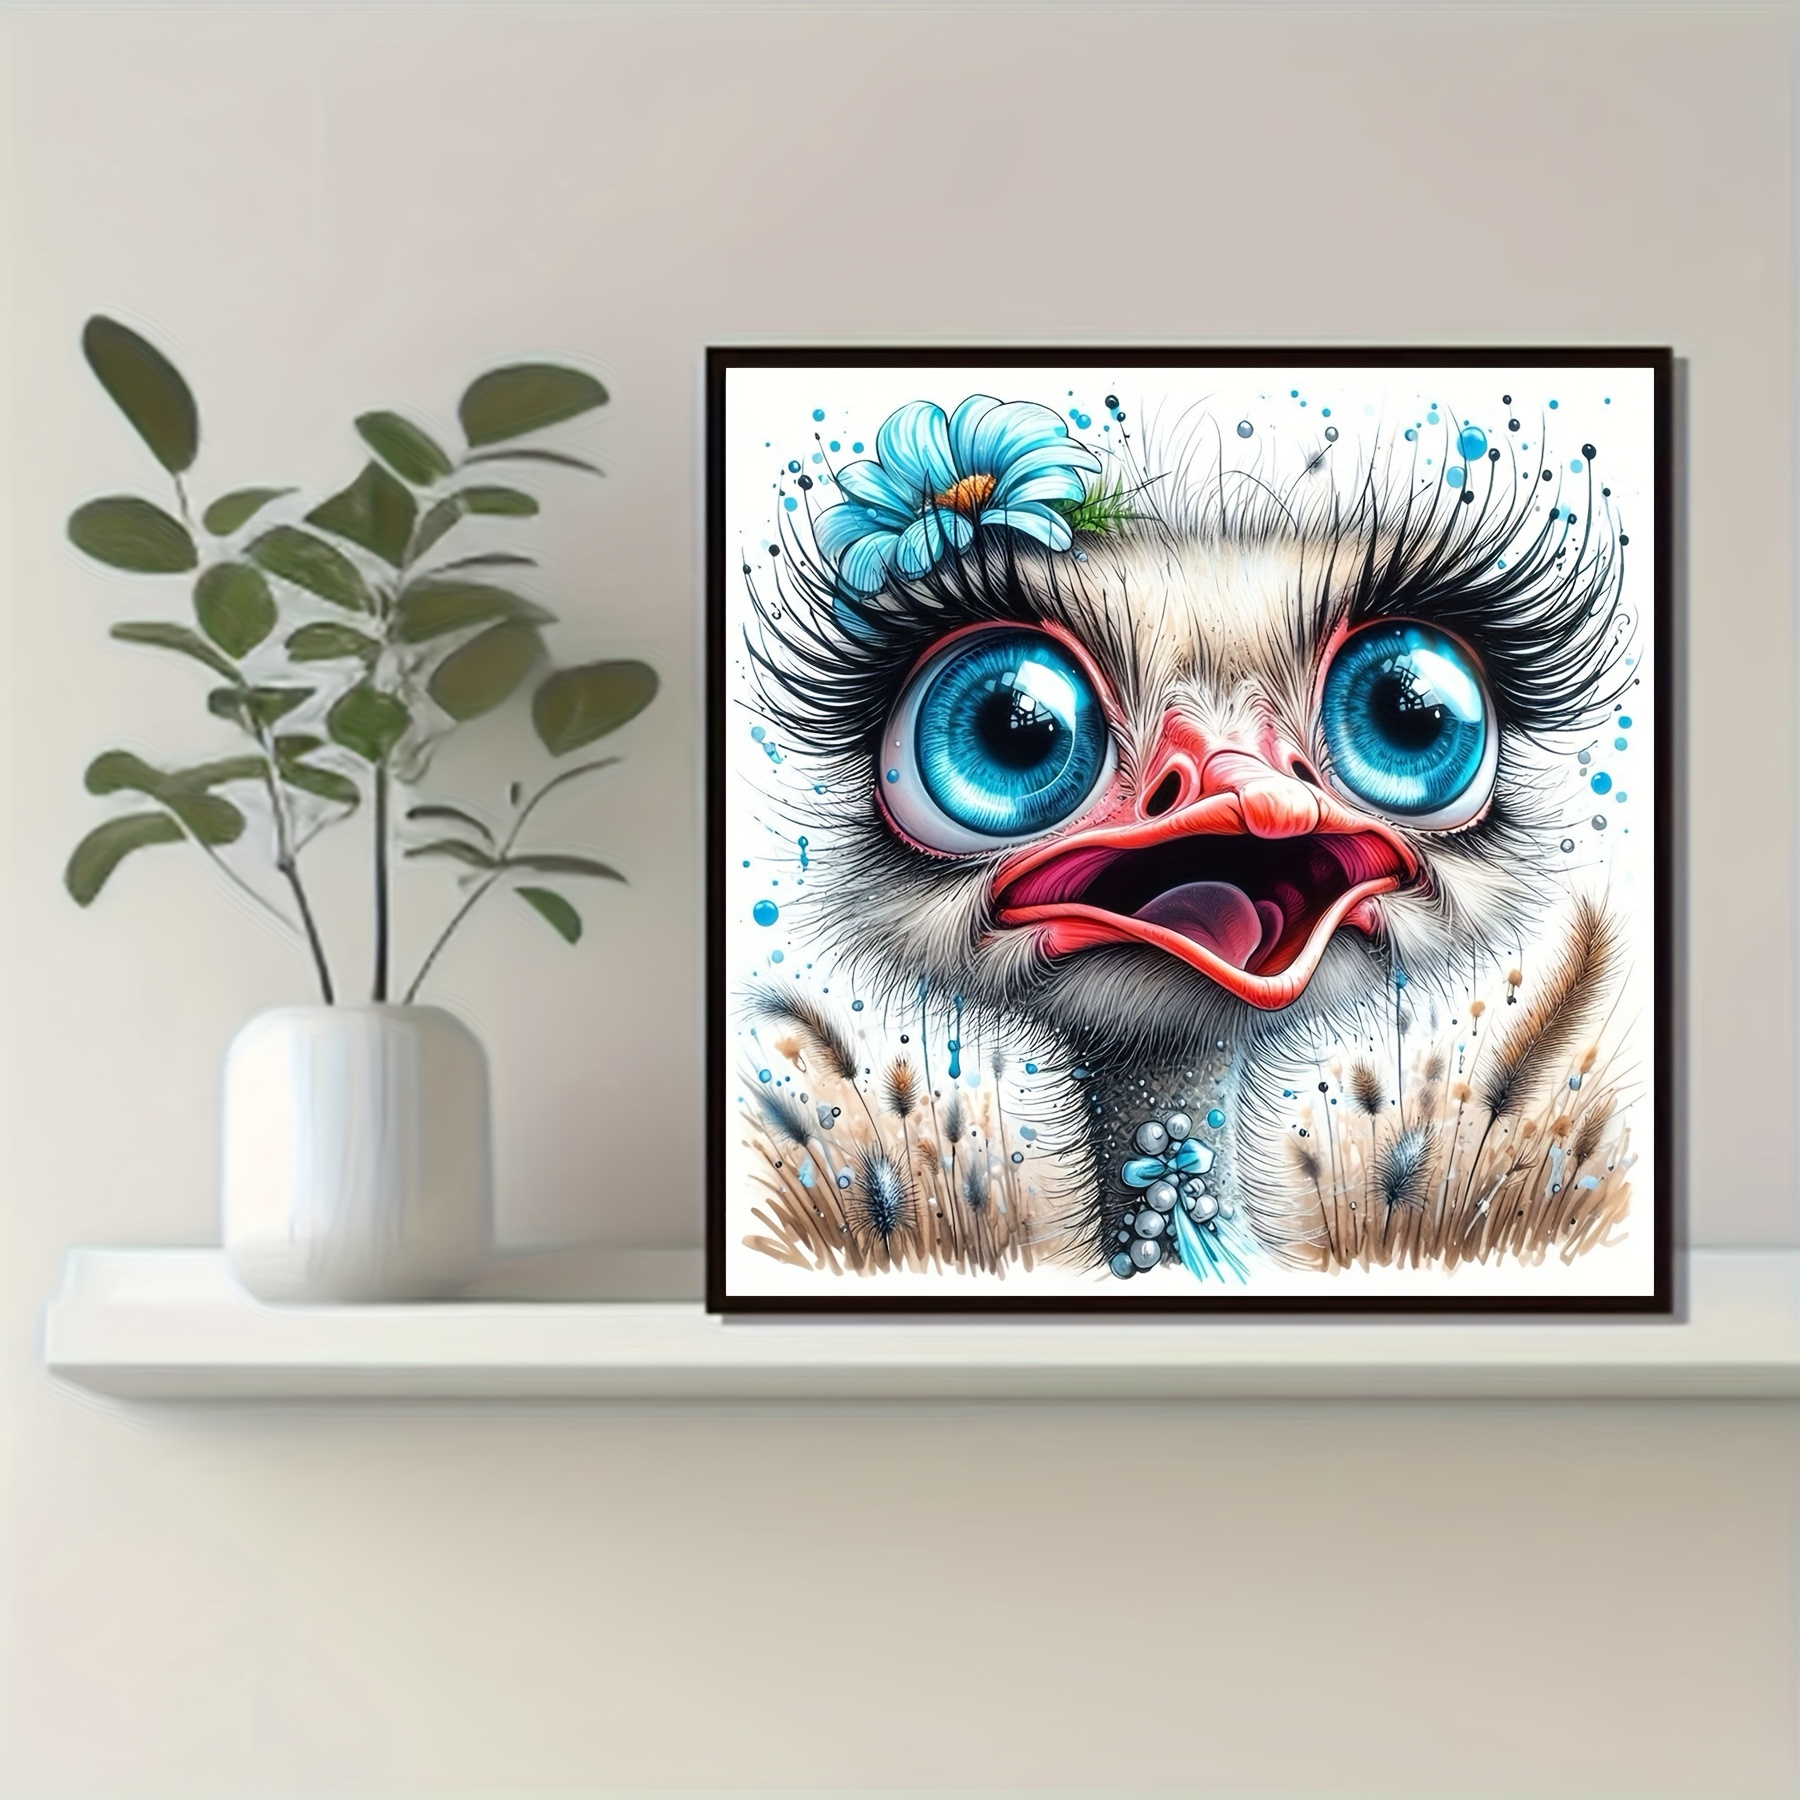 

5d Diy Diamond Painting Kit | Animal Theme Ostrich Design | Round Full Drill Canvas | Wall Decor Art & Craft | Home Decoration Gift Set | Includes Accessories | 30x30cm (11.8x11.8 Inch)